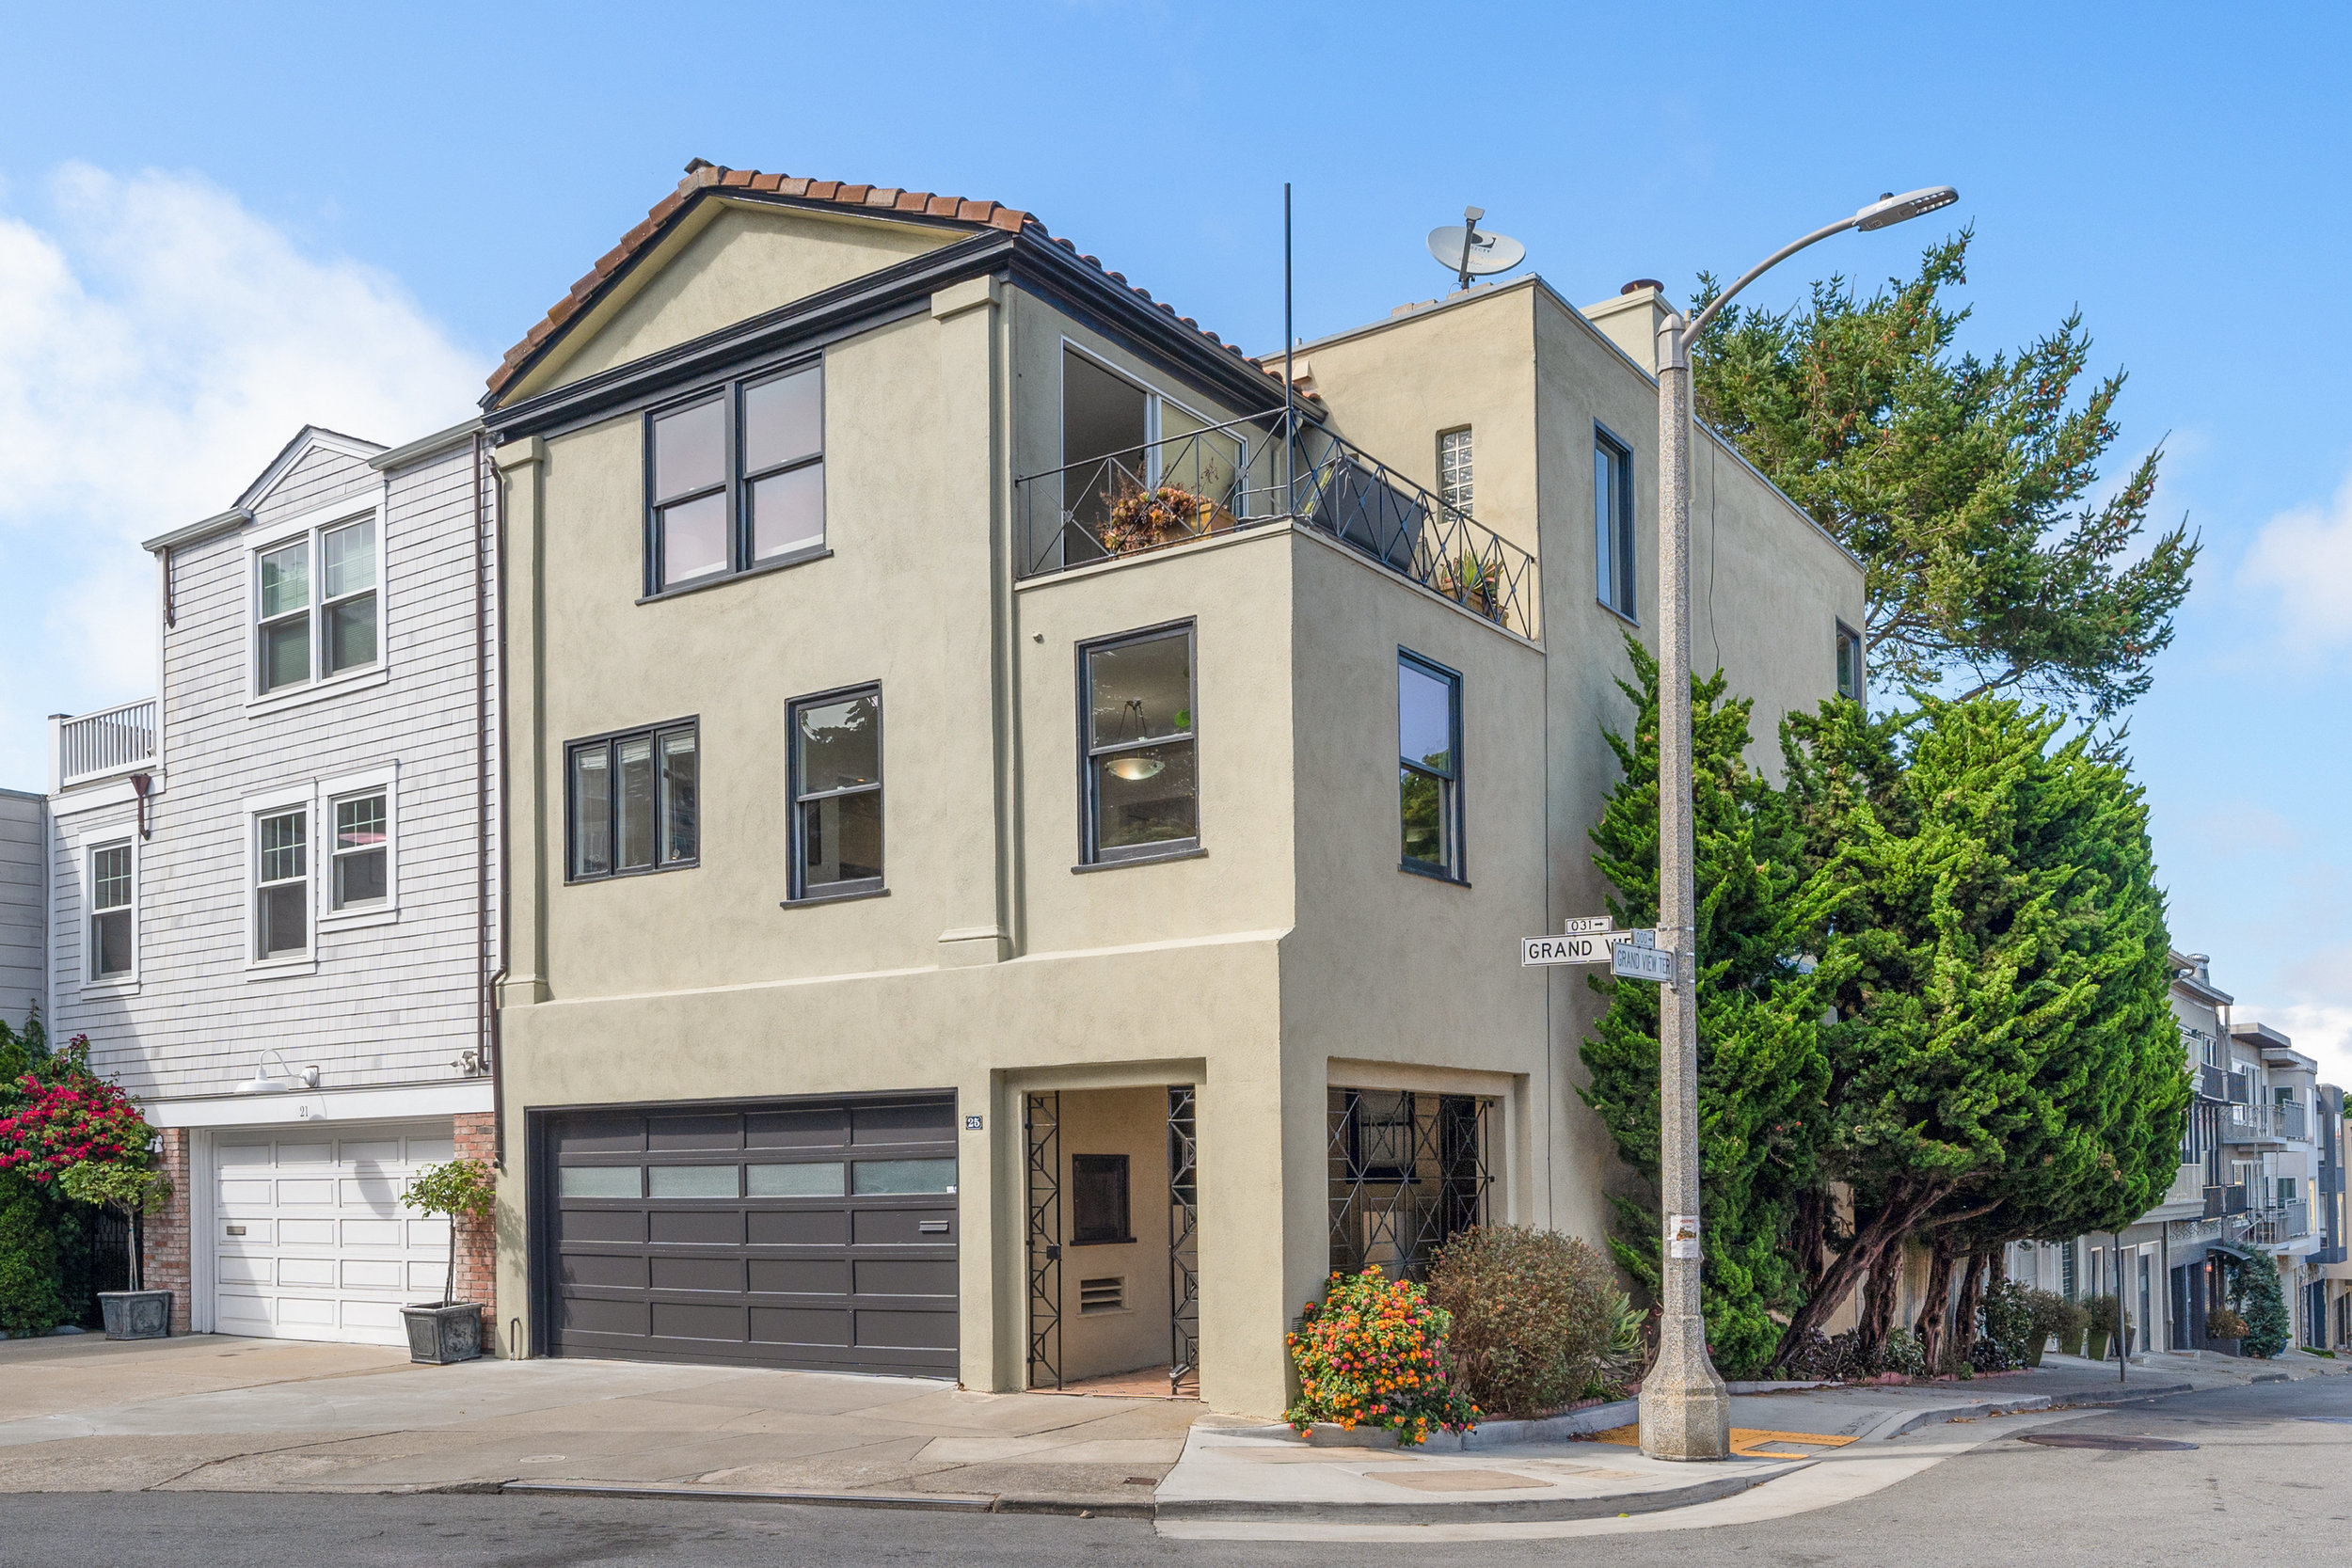 Property Photo: Front exterior view of 25 Grand View Avenue, showing a large single-family home in Noe Valley